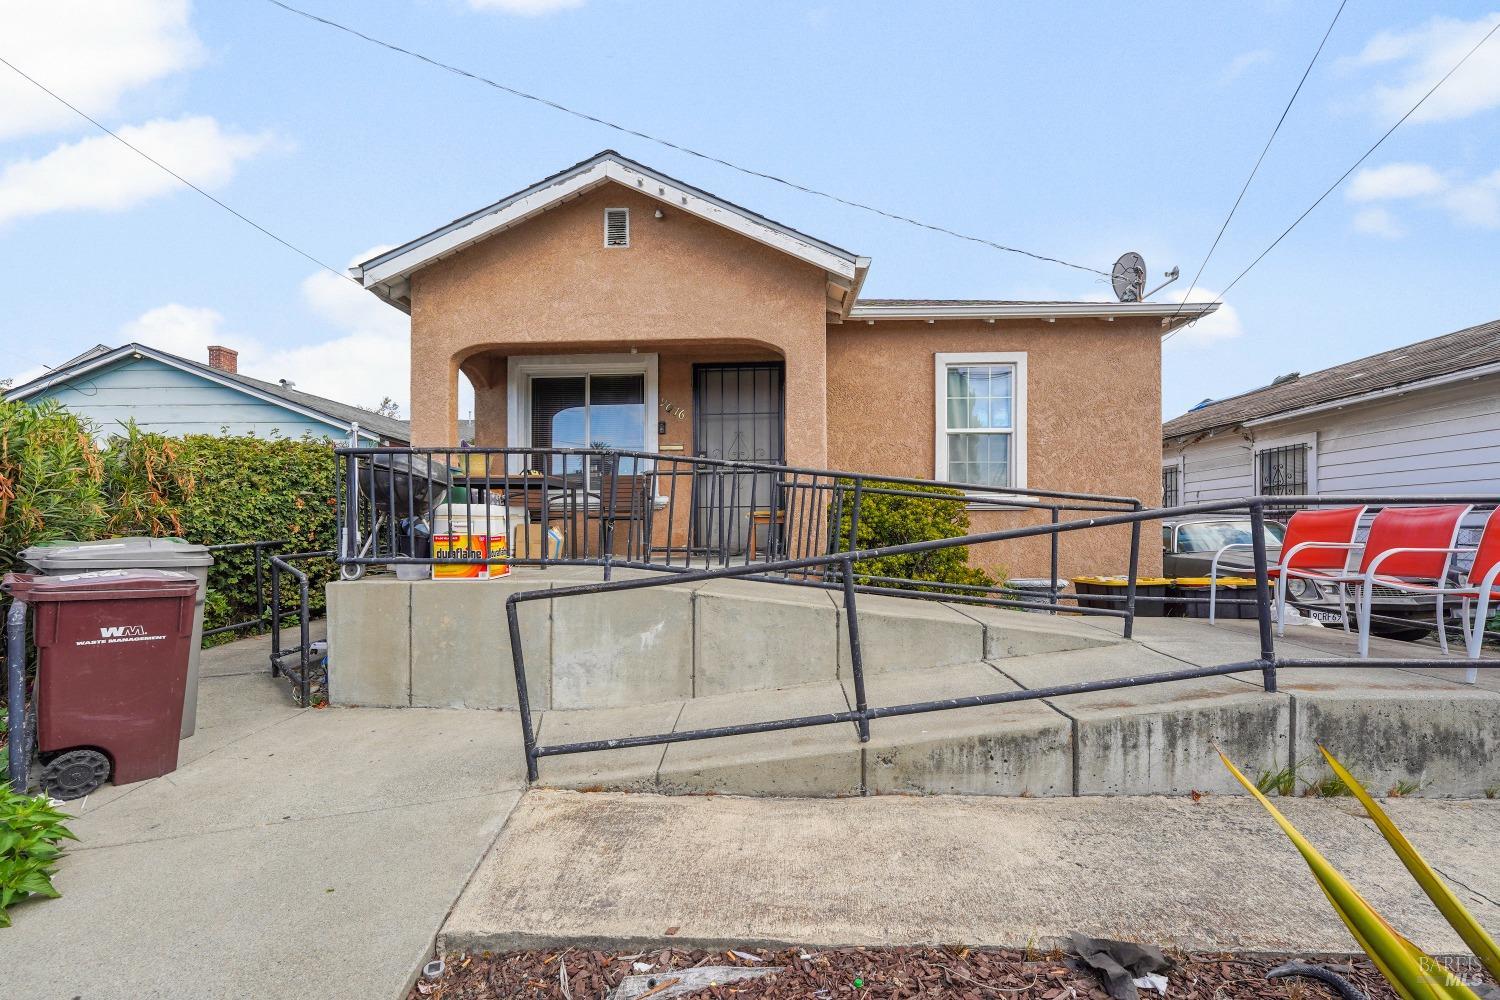 Photo of 9016 Plymouth St in Oakland, CA